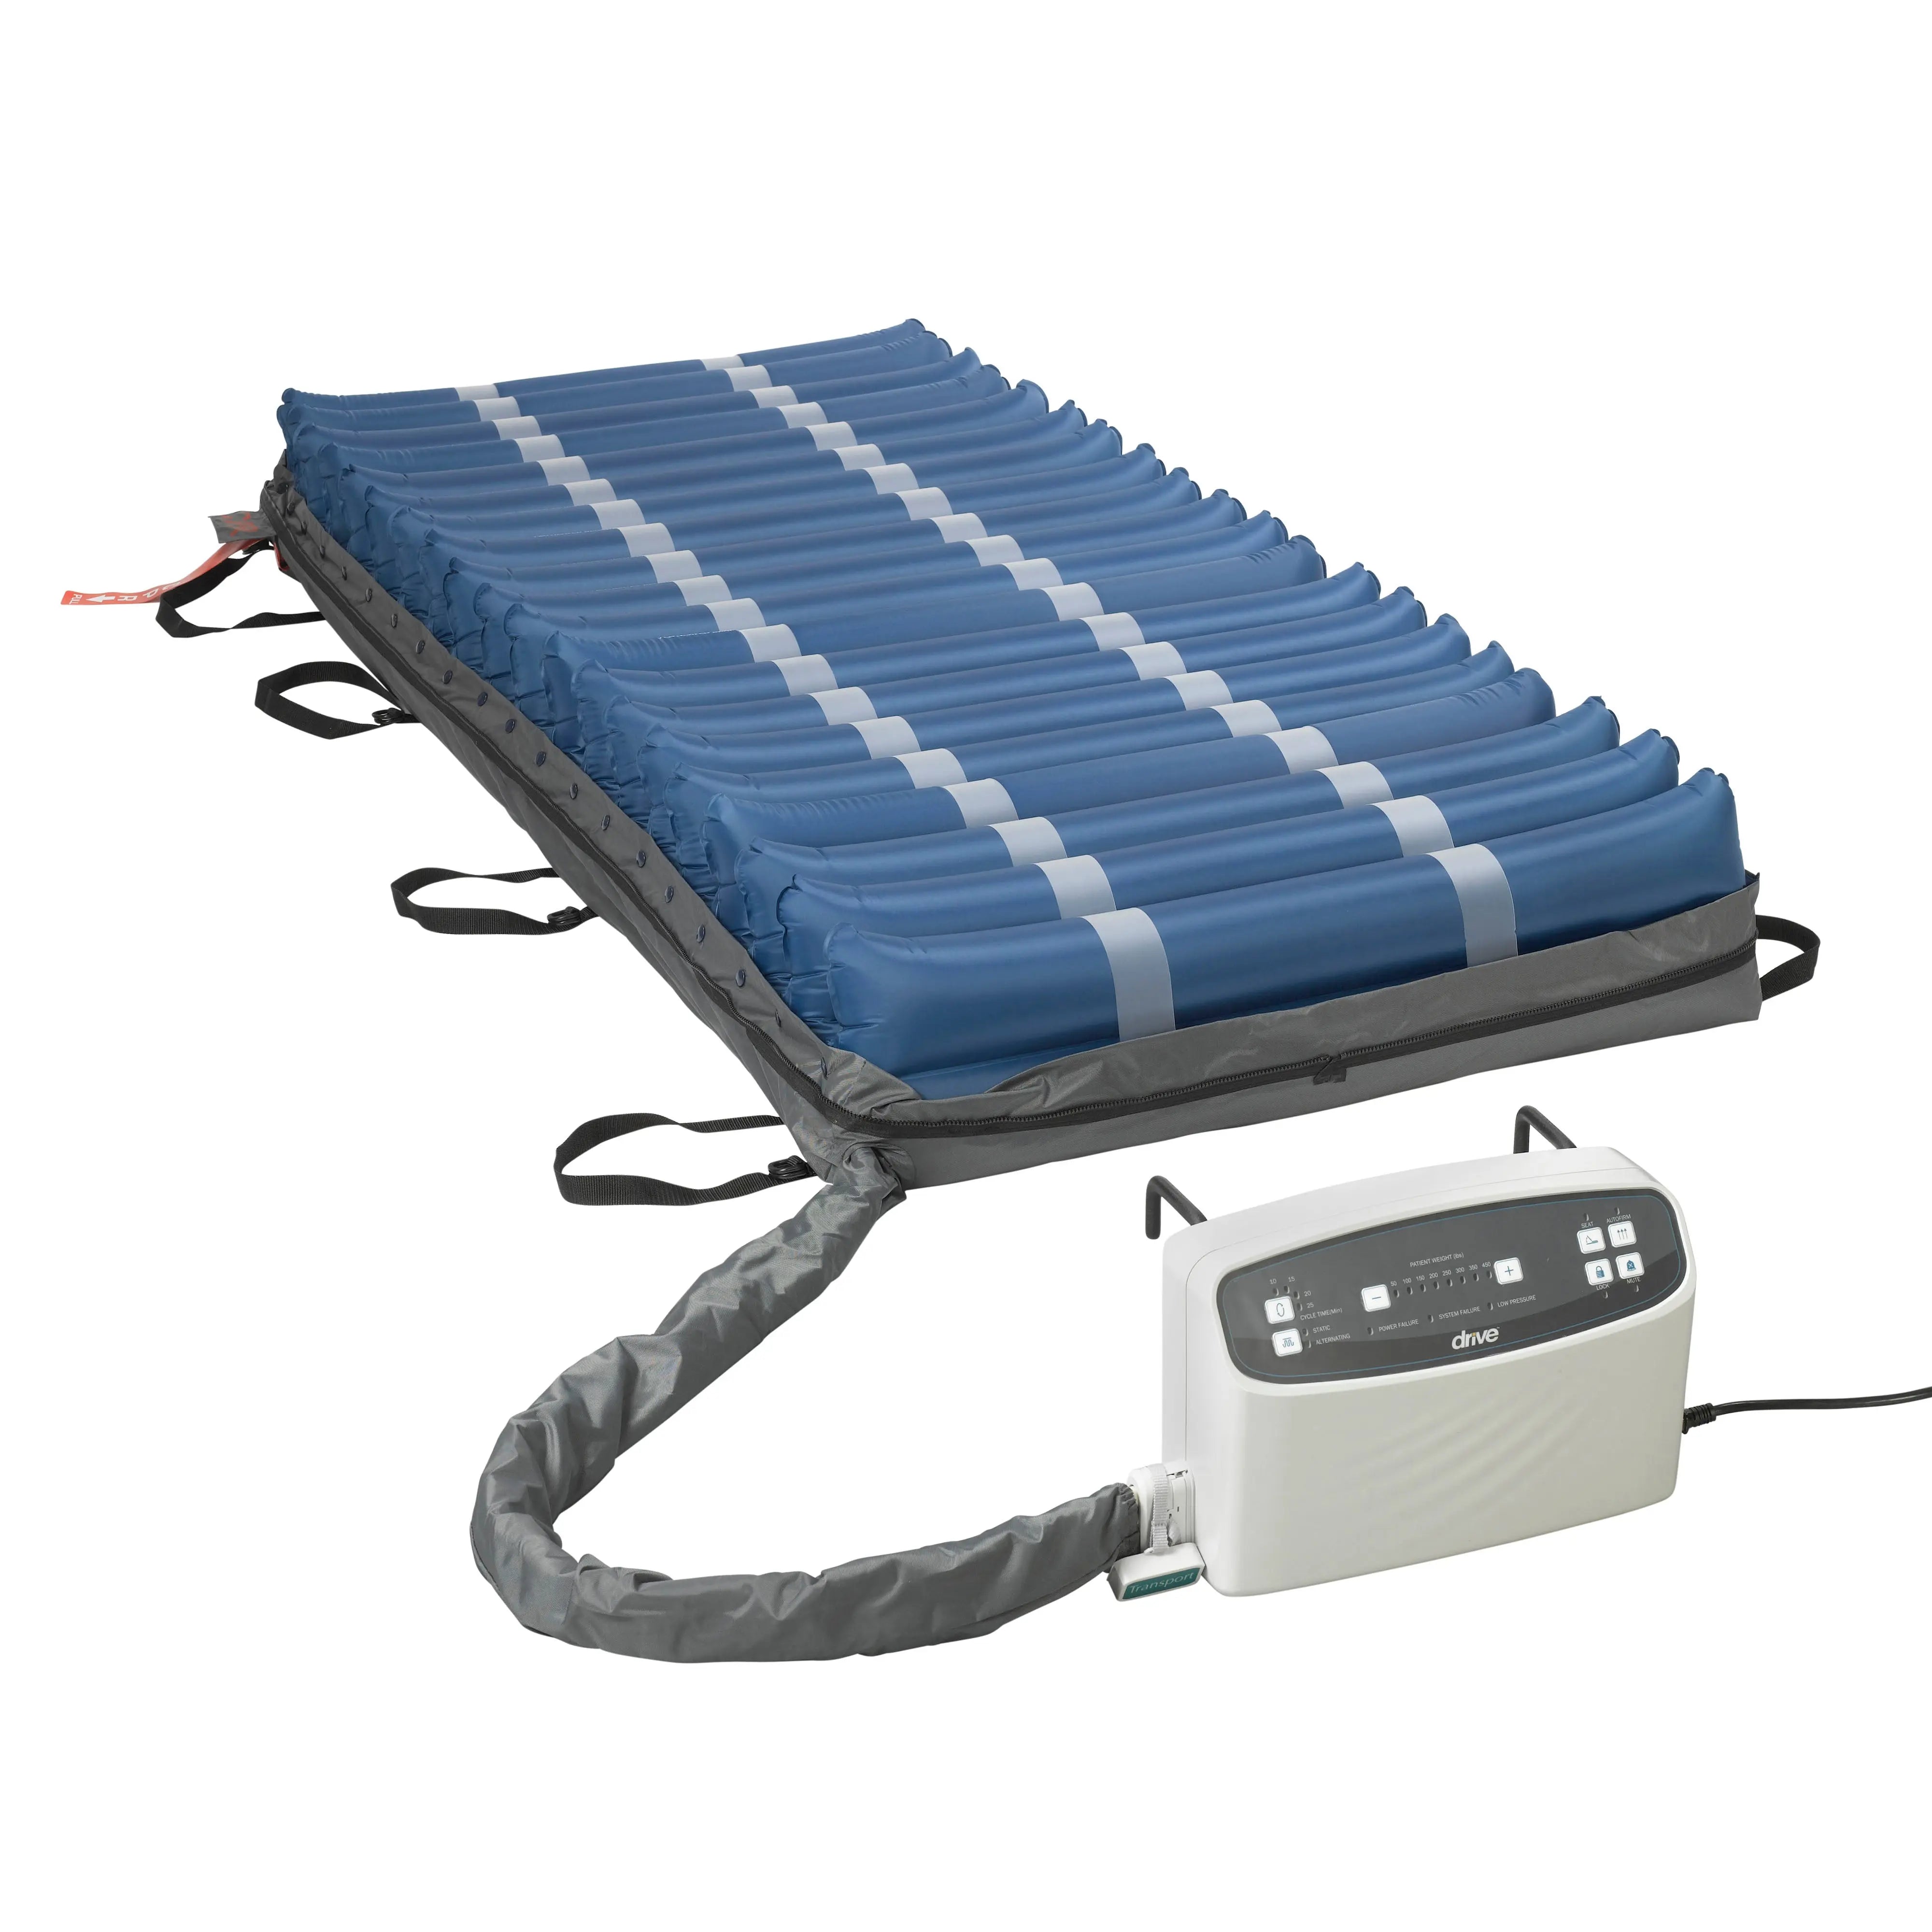 Med Aire Plus Low Air Loss Mattress Replacement System - Home Health Store Inc